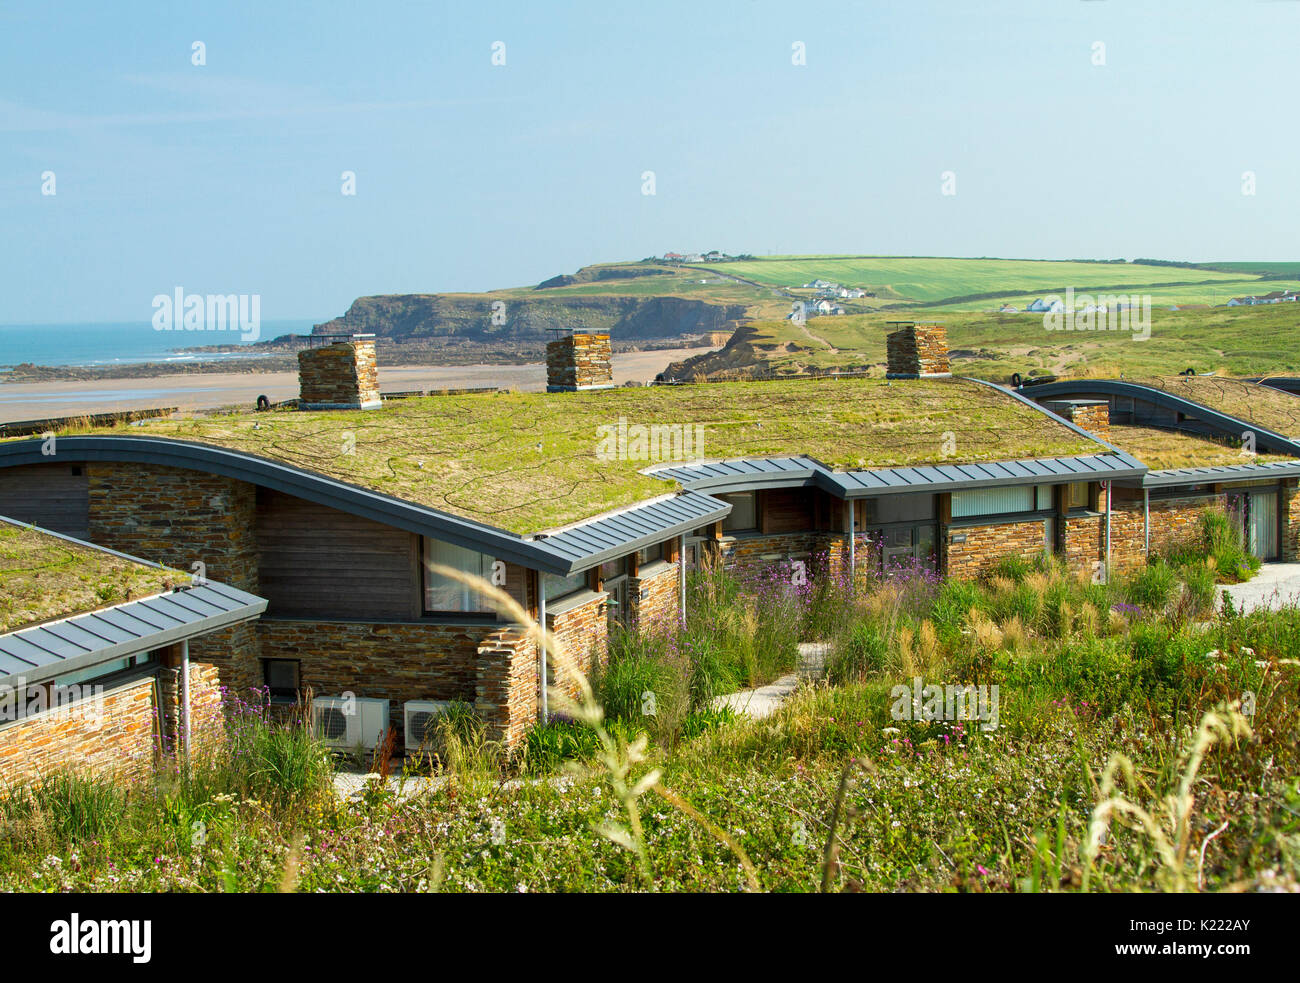 Modern house / bungalow with insulating sod roof / green living roof and black piping for solar water heating at Widemouth Bay, Cornwall, England Stock Photo